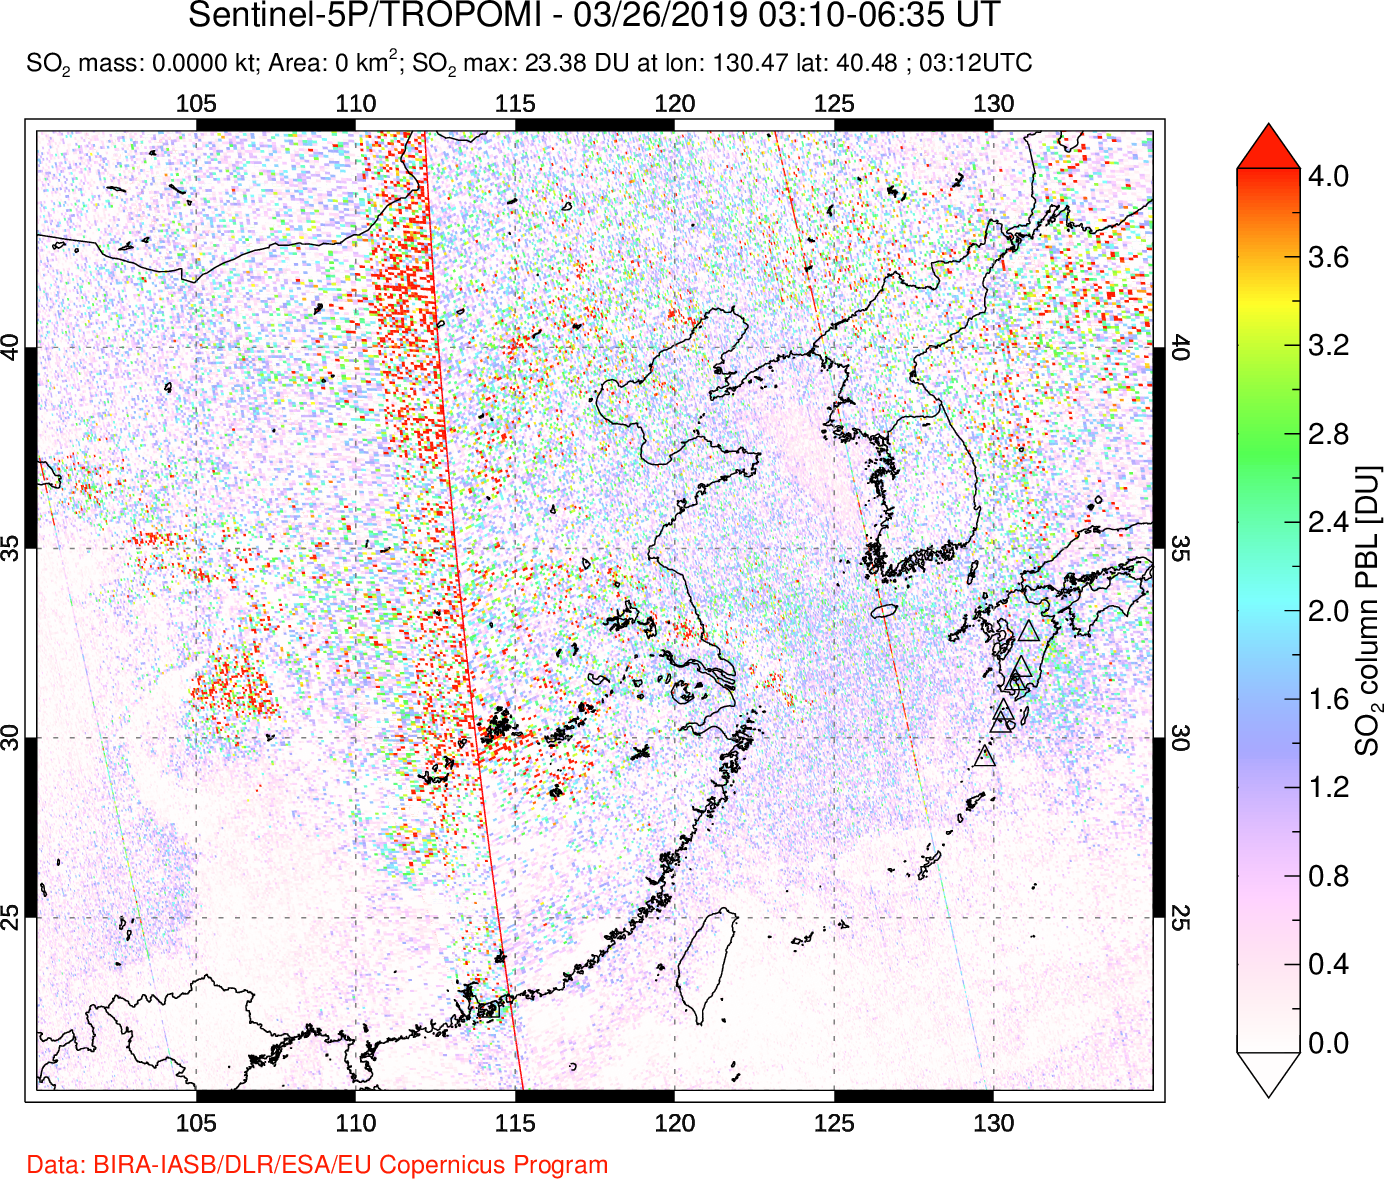 A sulfur dioxide image over Eastern China on Mar 26, 2019.